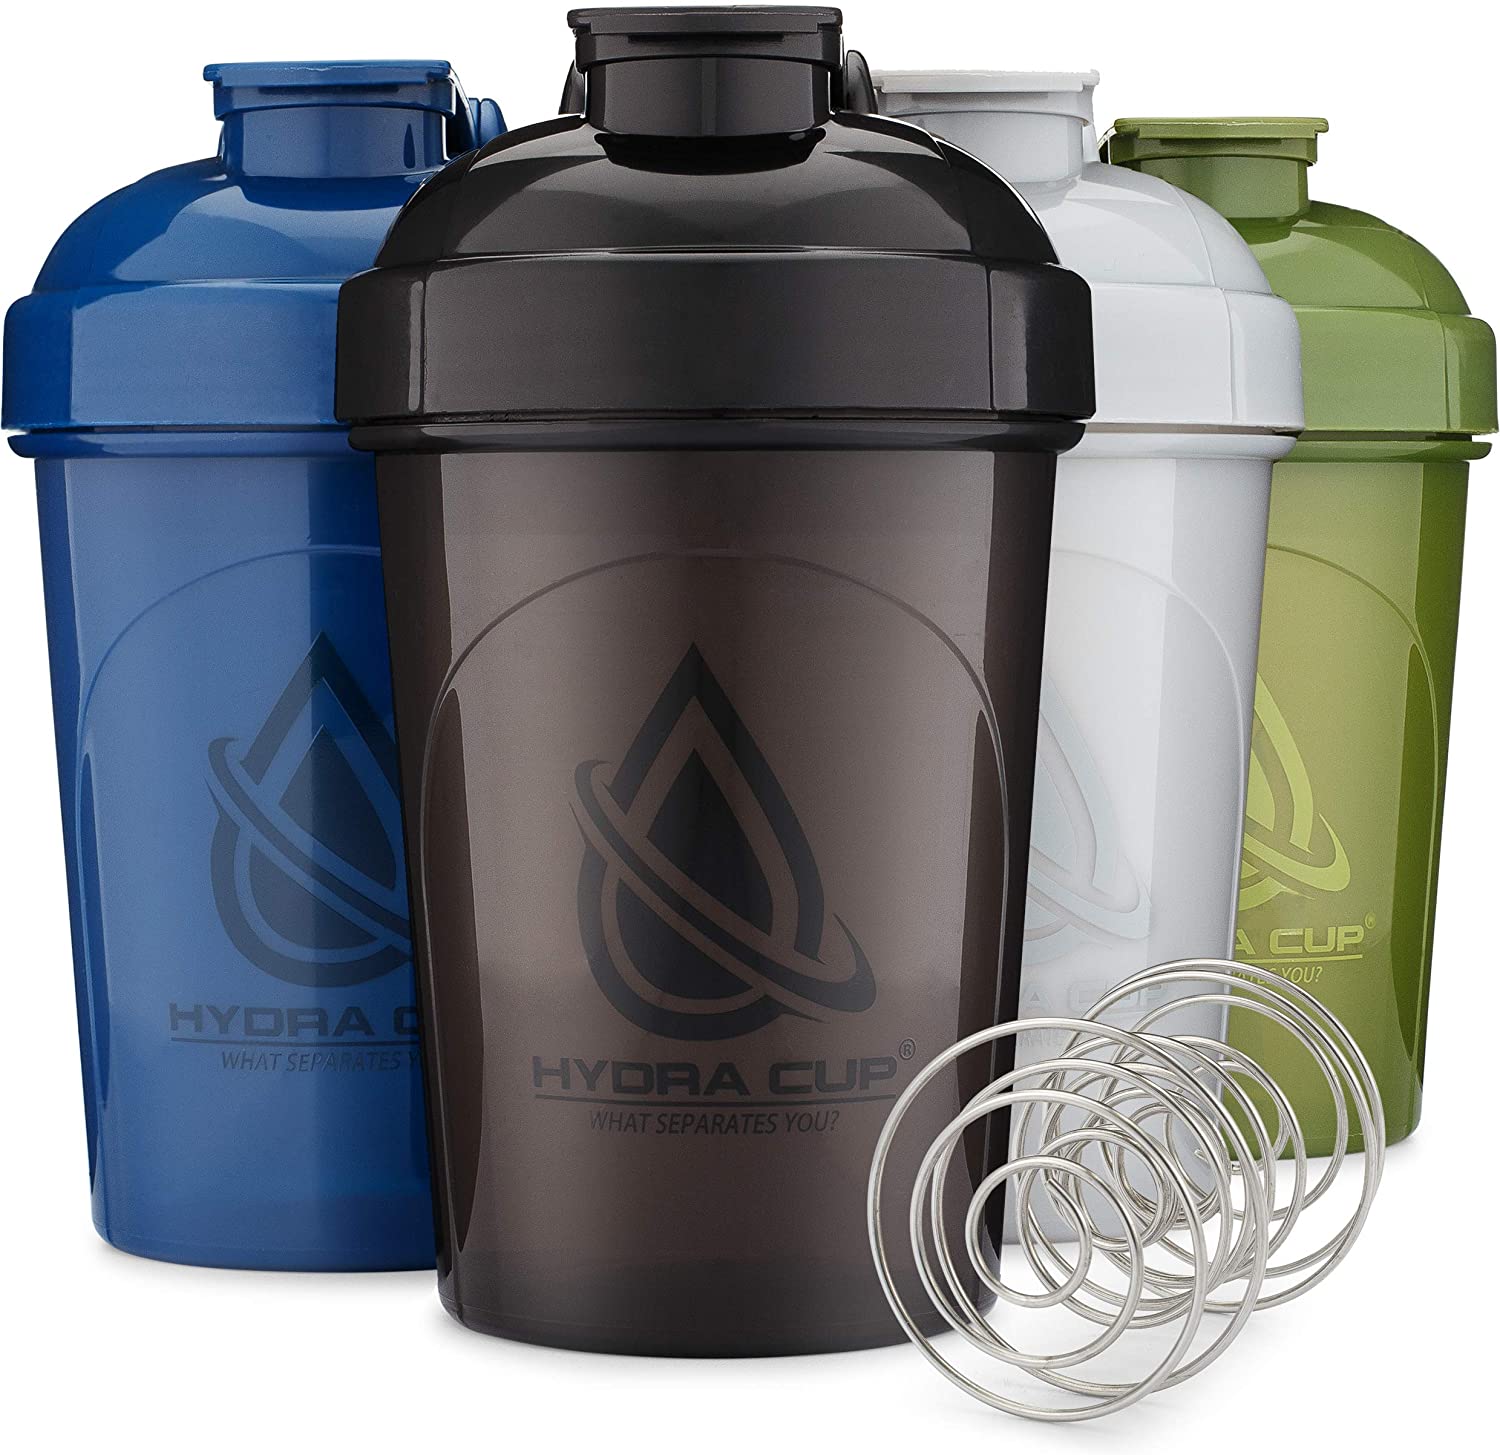 Hydra Cup - Kratom Accessories Shaker Bottle With Wire Whisk Balls